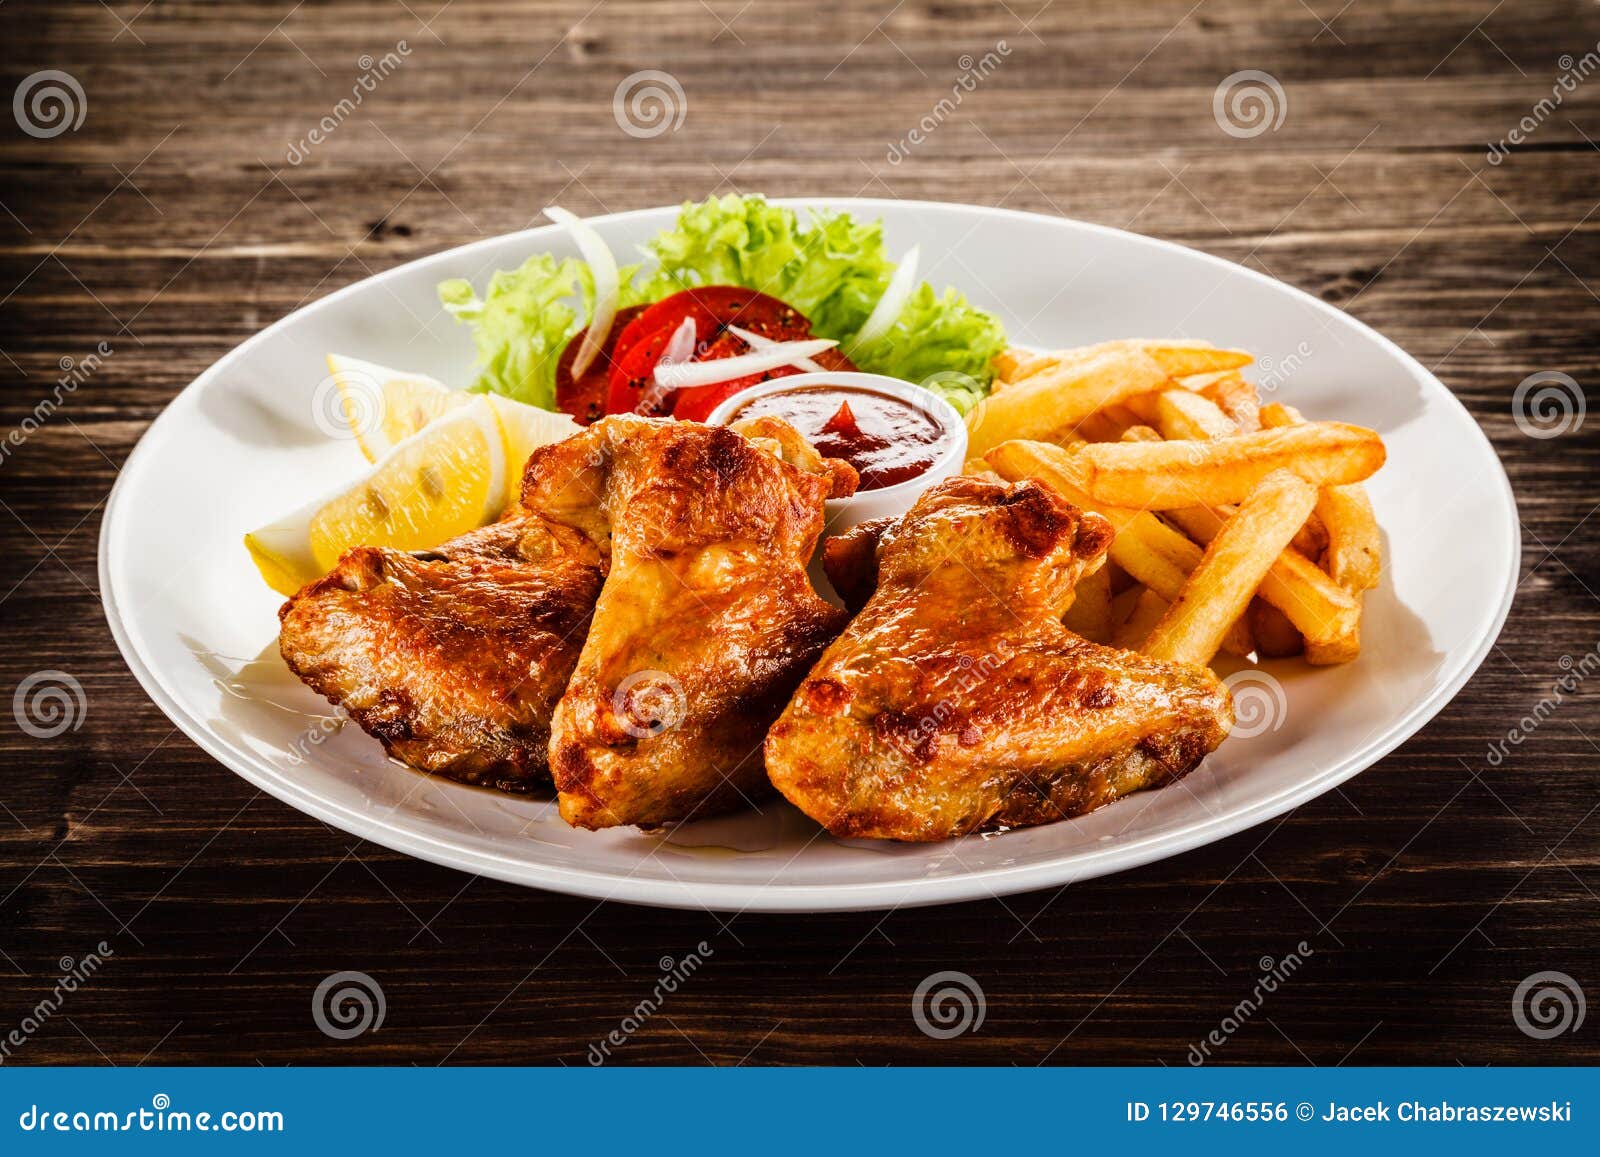 Grilled Chicken Wings, Chips and Vegetables Stock Photo - Image of ...